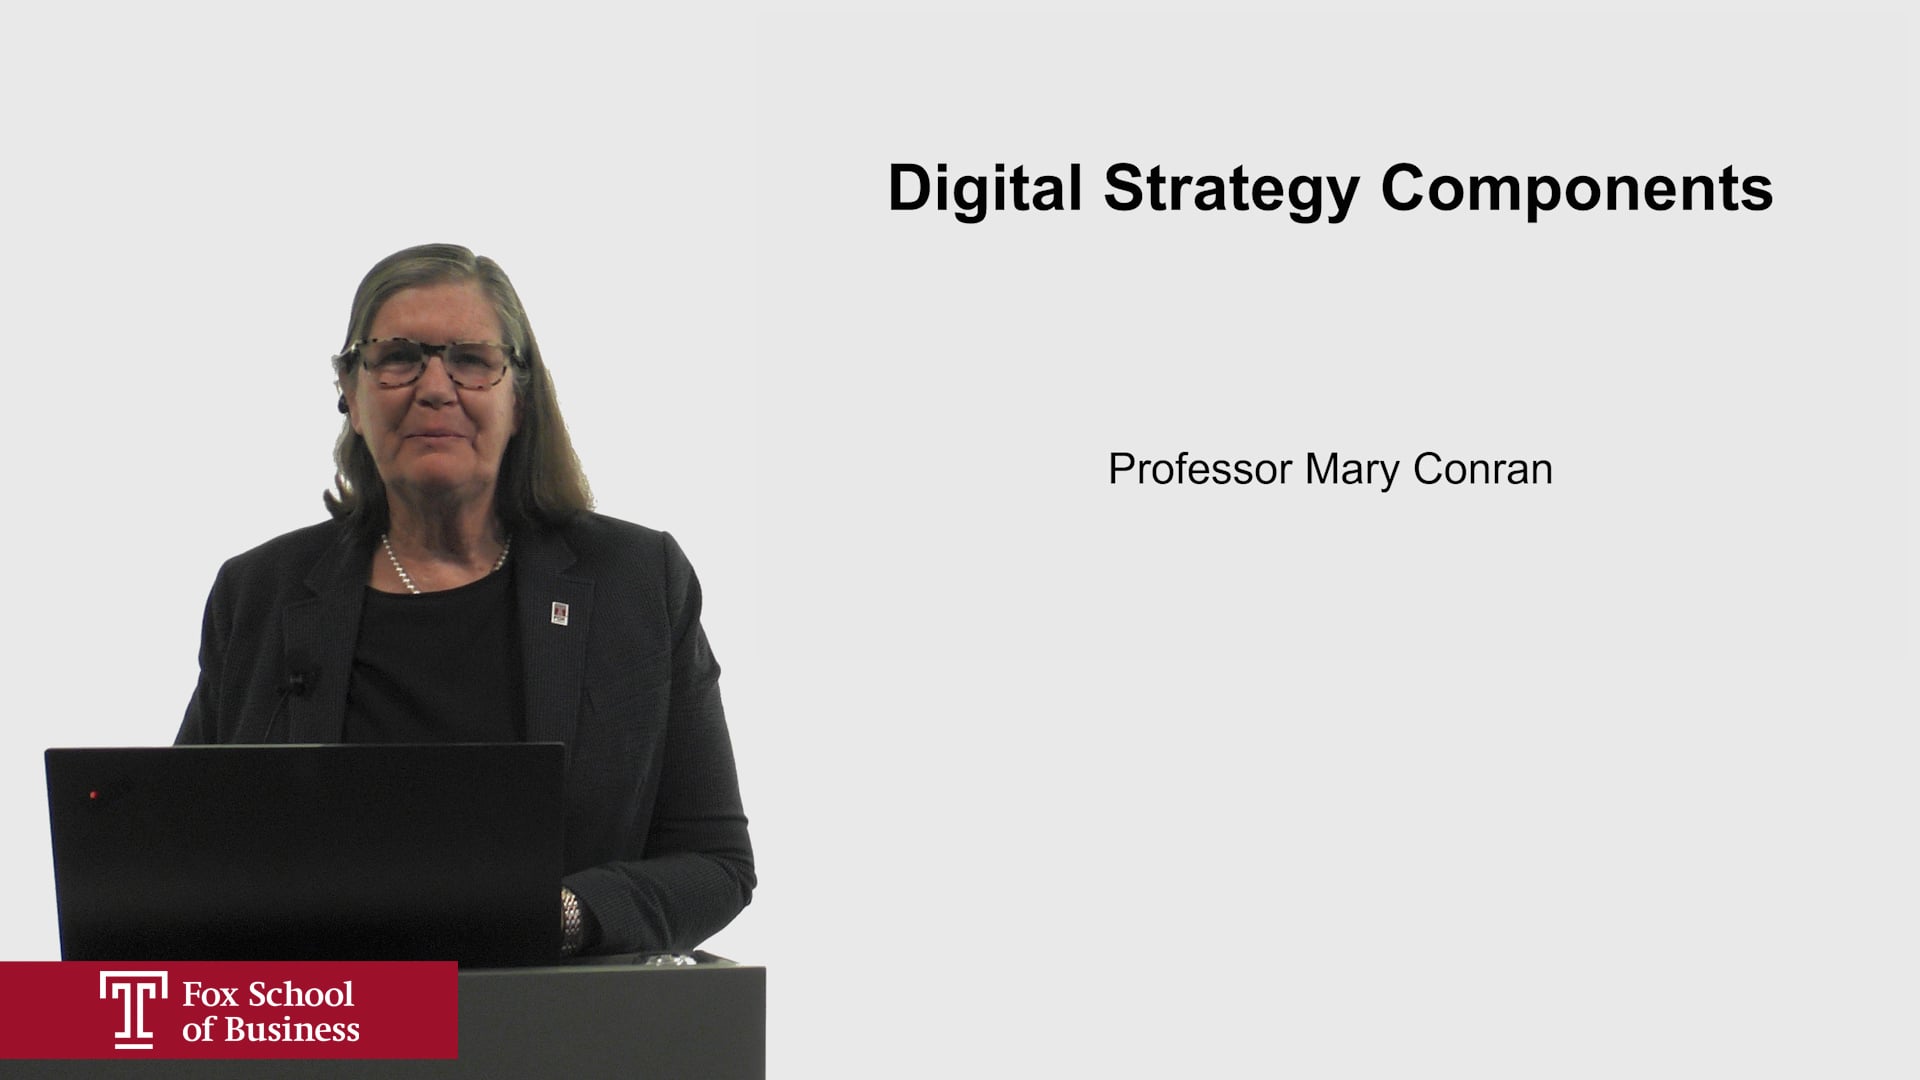 Digital Strategy Components